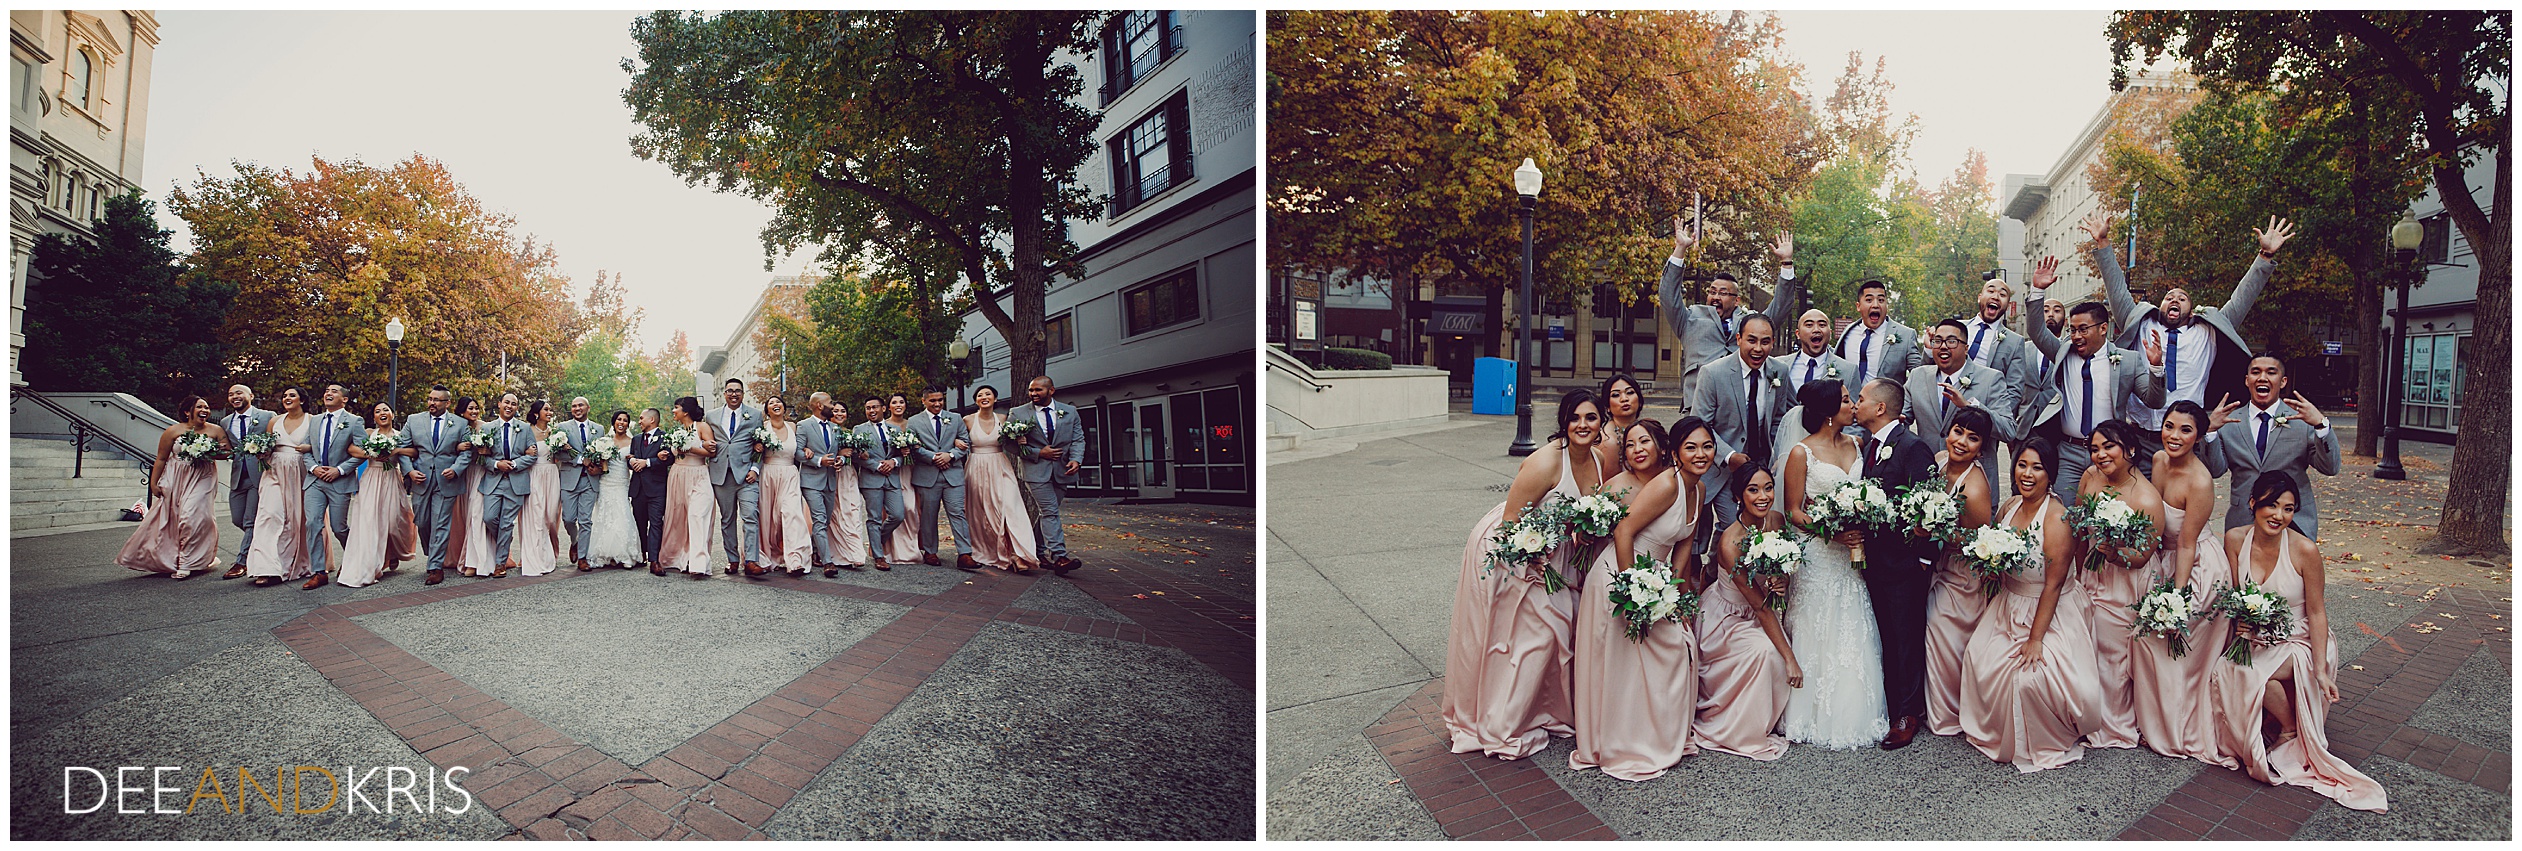 Sacramento Wedding photographers Dee and Kris photograph large bridal party downtown, wedding flowers by Wild Flowers Design Group 